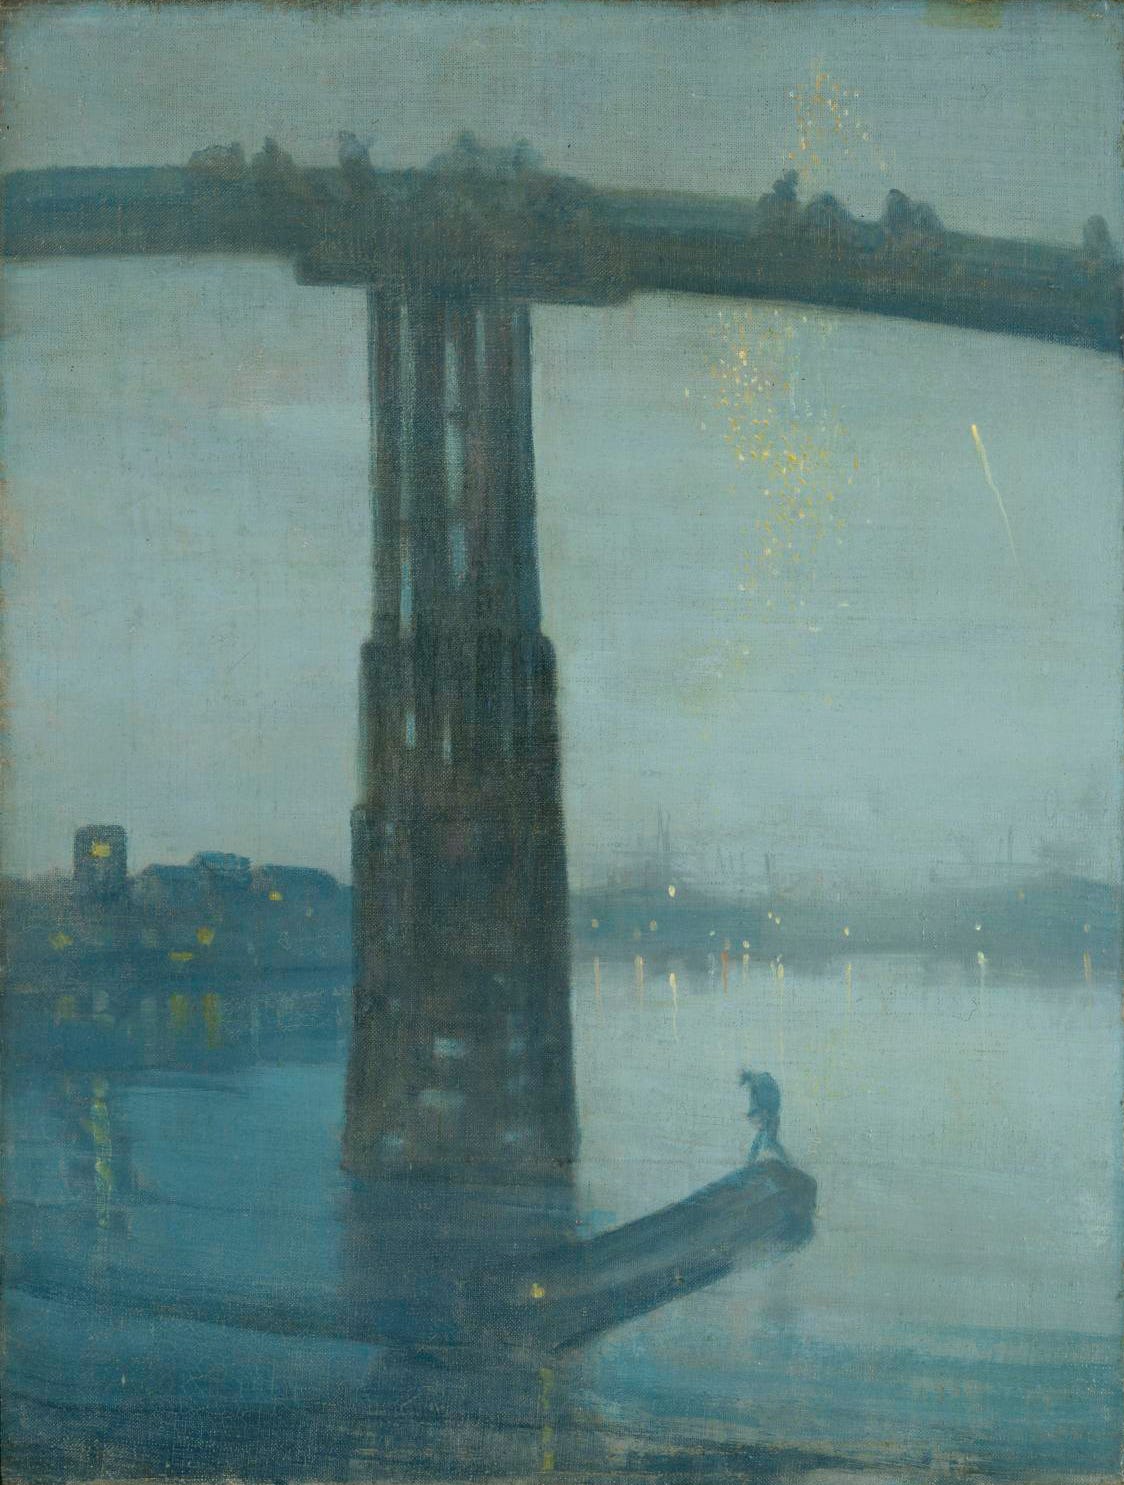 Nocturne in Blue and Gold: Old Battersea Bridge (c. 1872-1875)